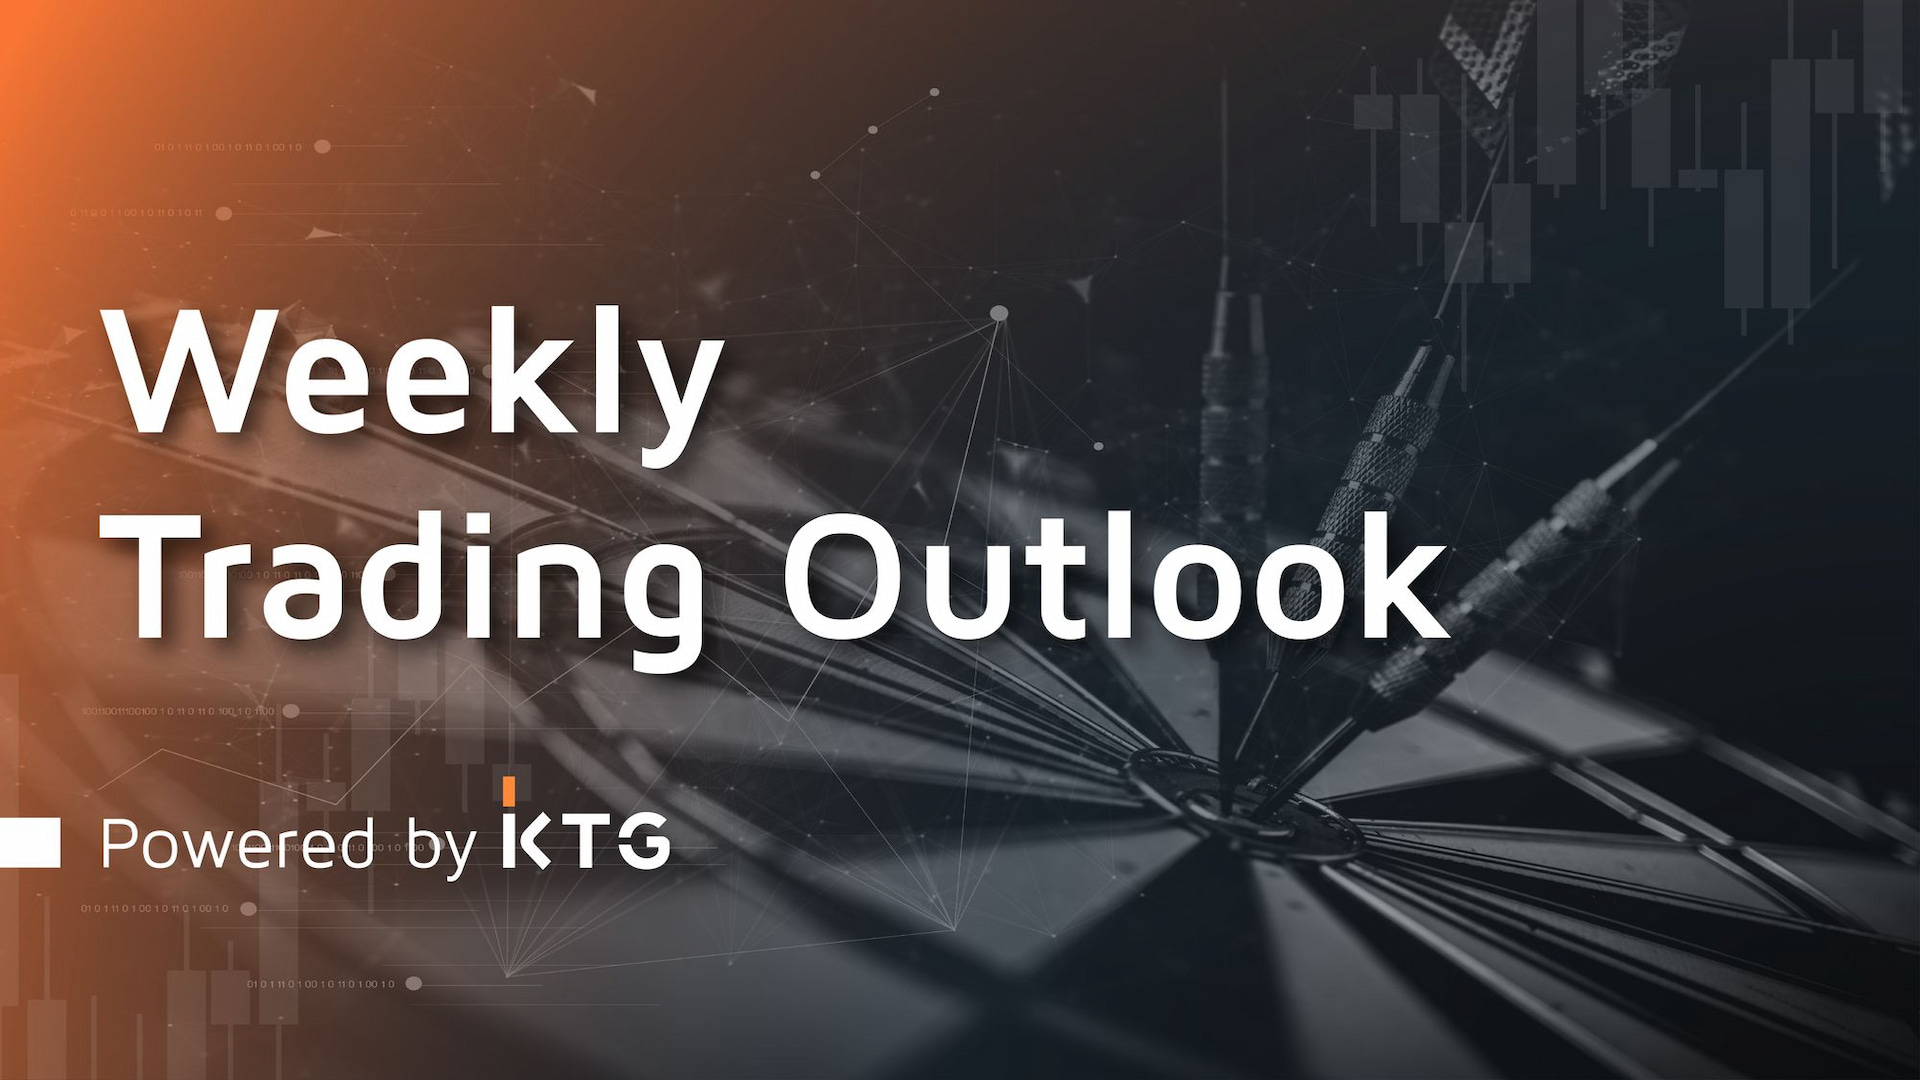 Directional moves still on the cards? - #TradingOutlook Powered by KTG